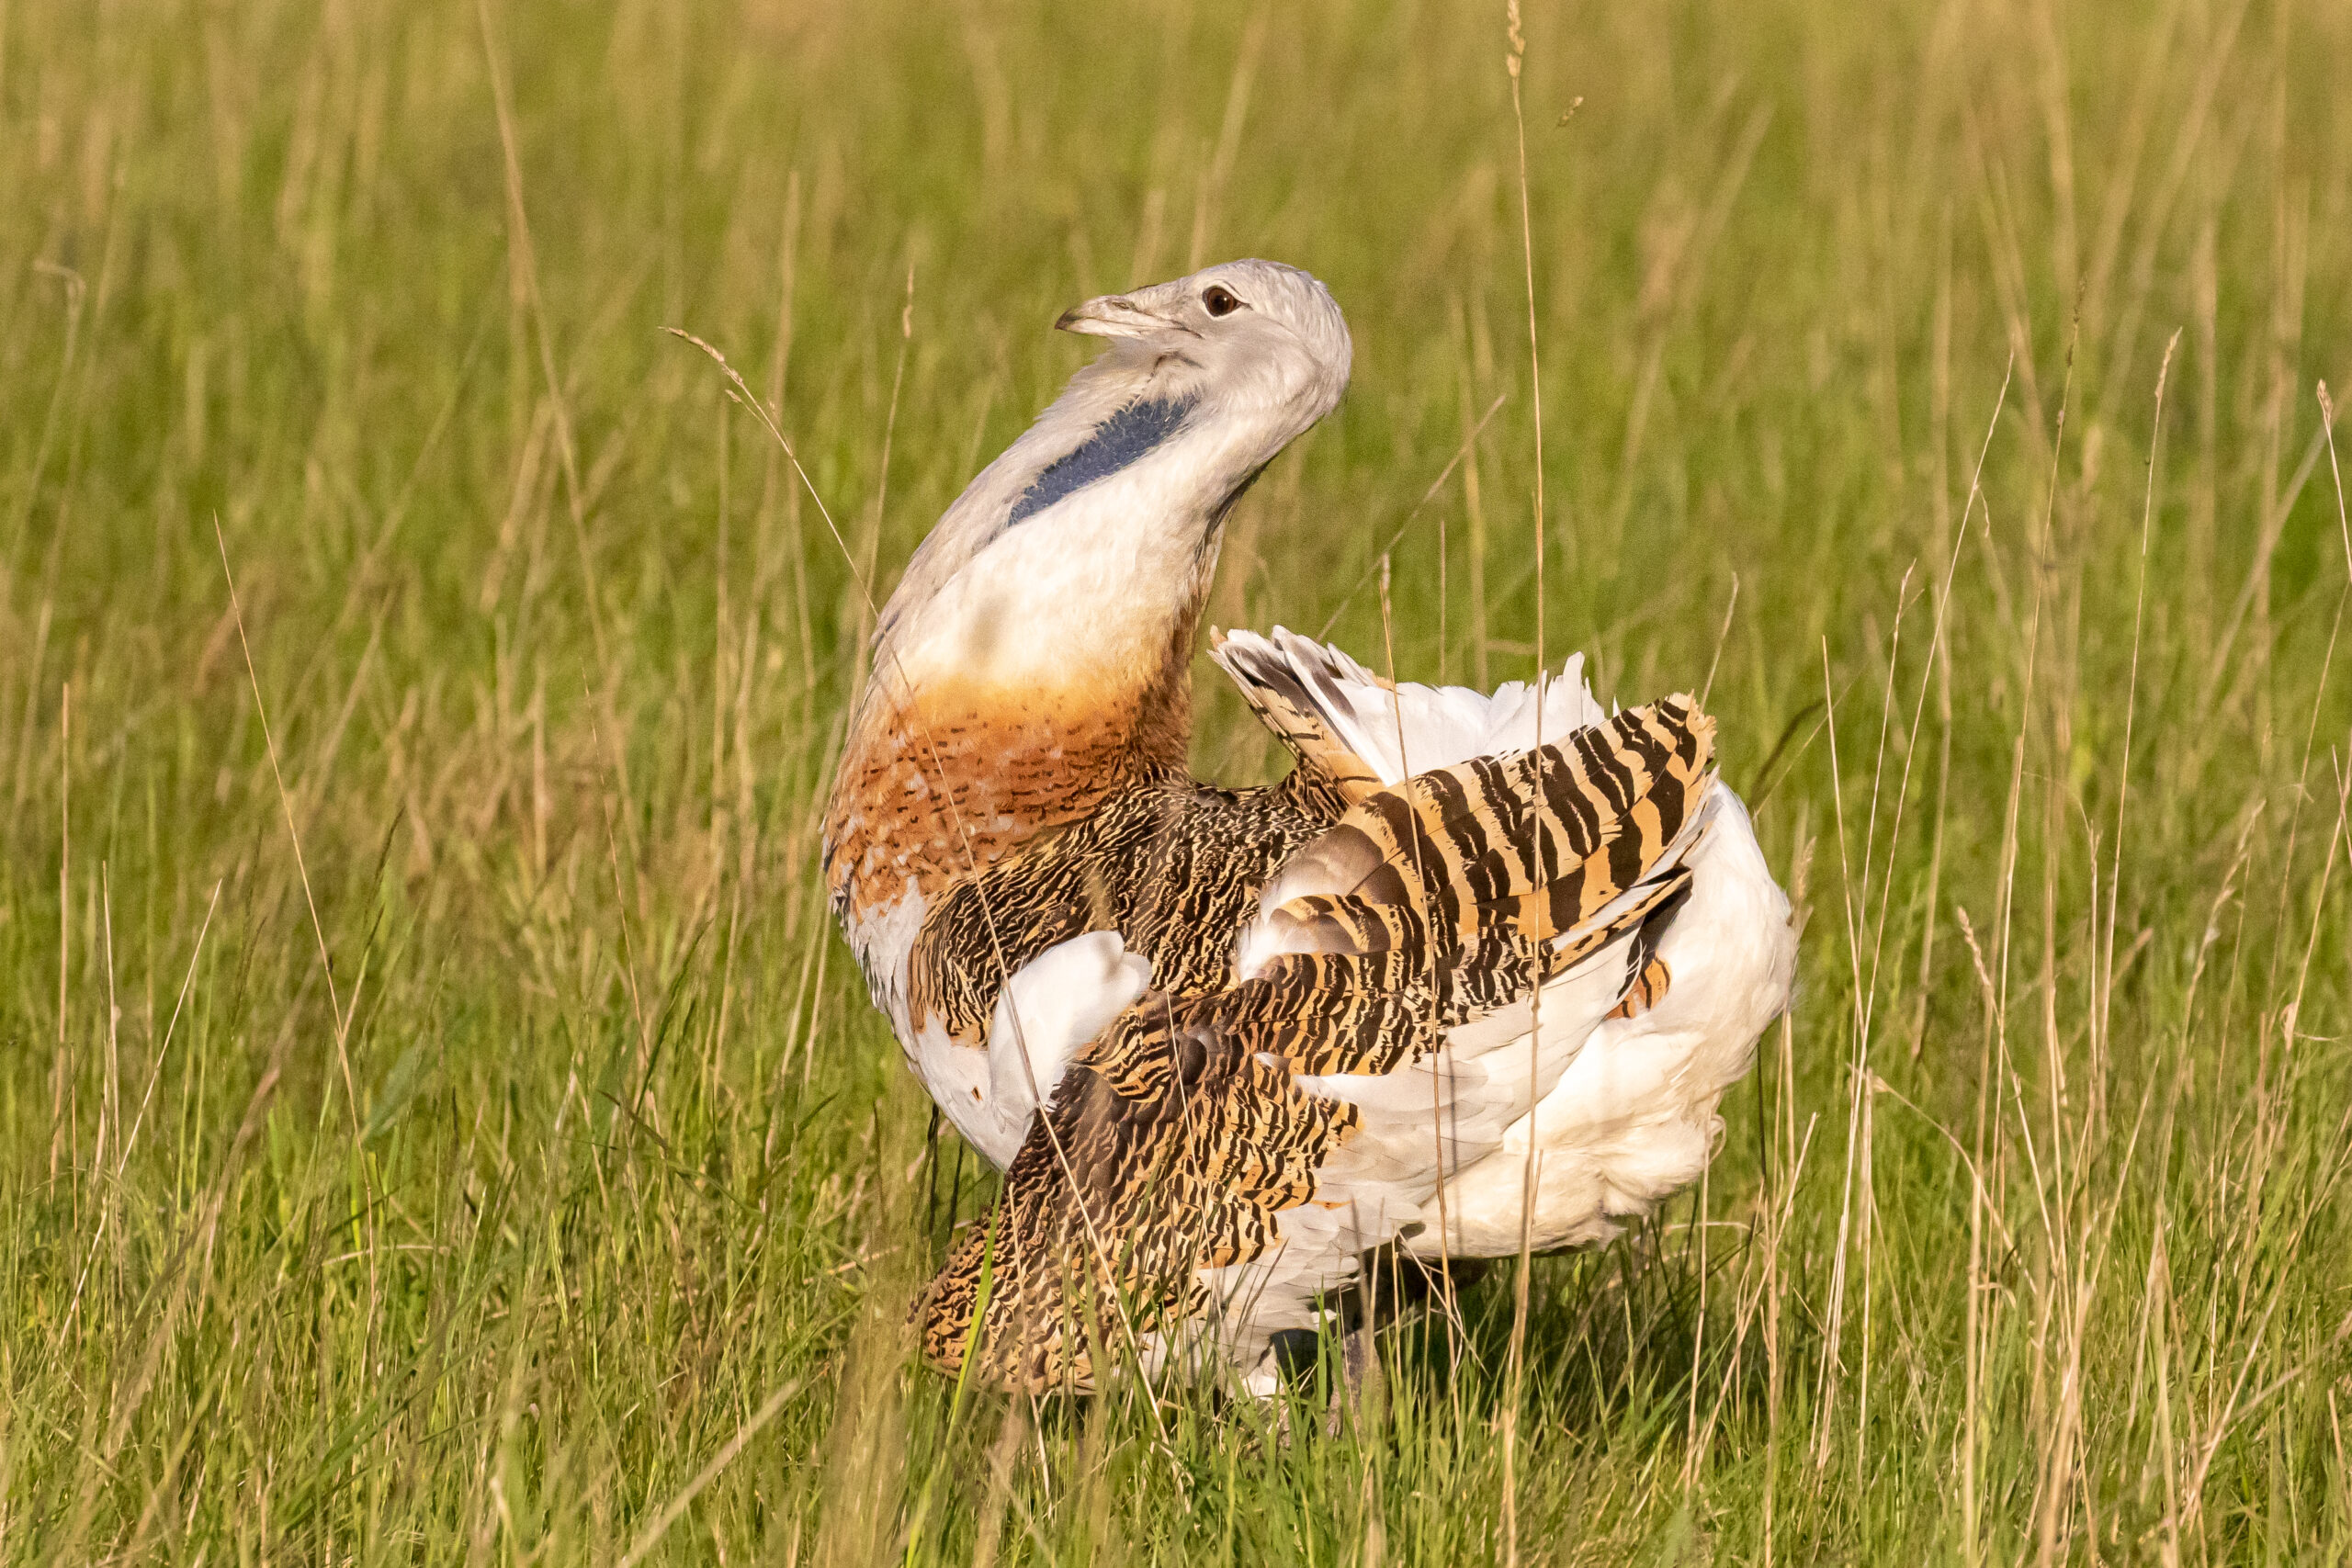 Great Bustard male - a large bird with brown and white feathers